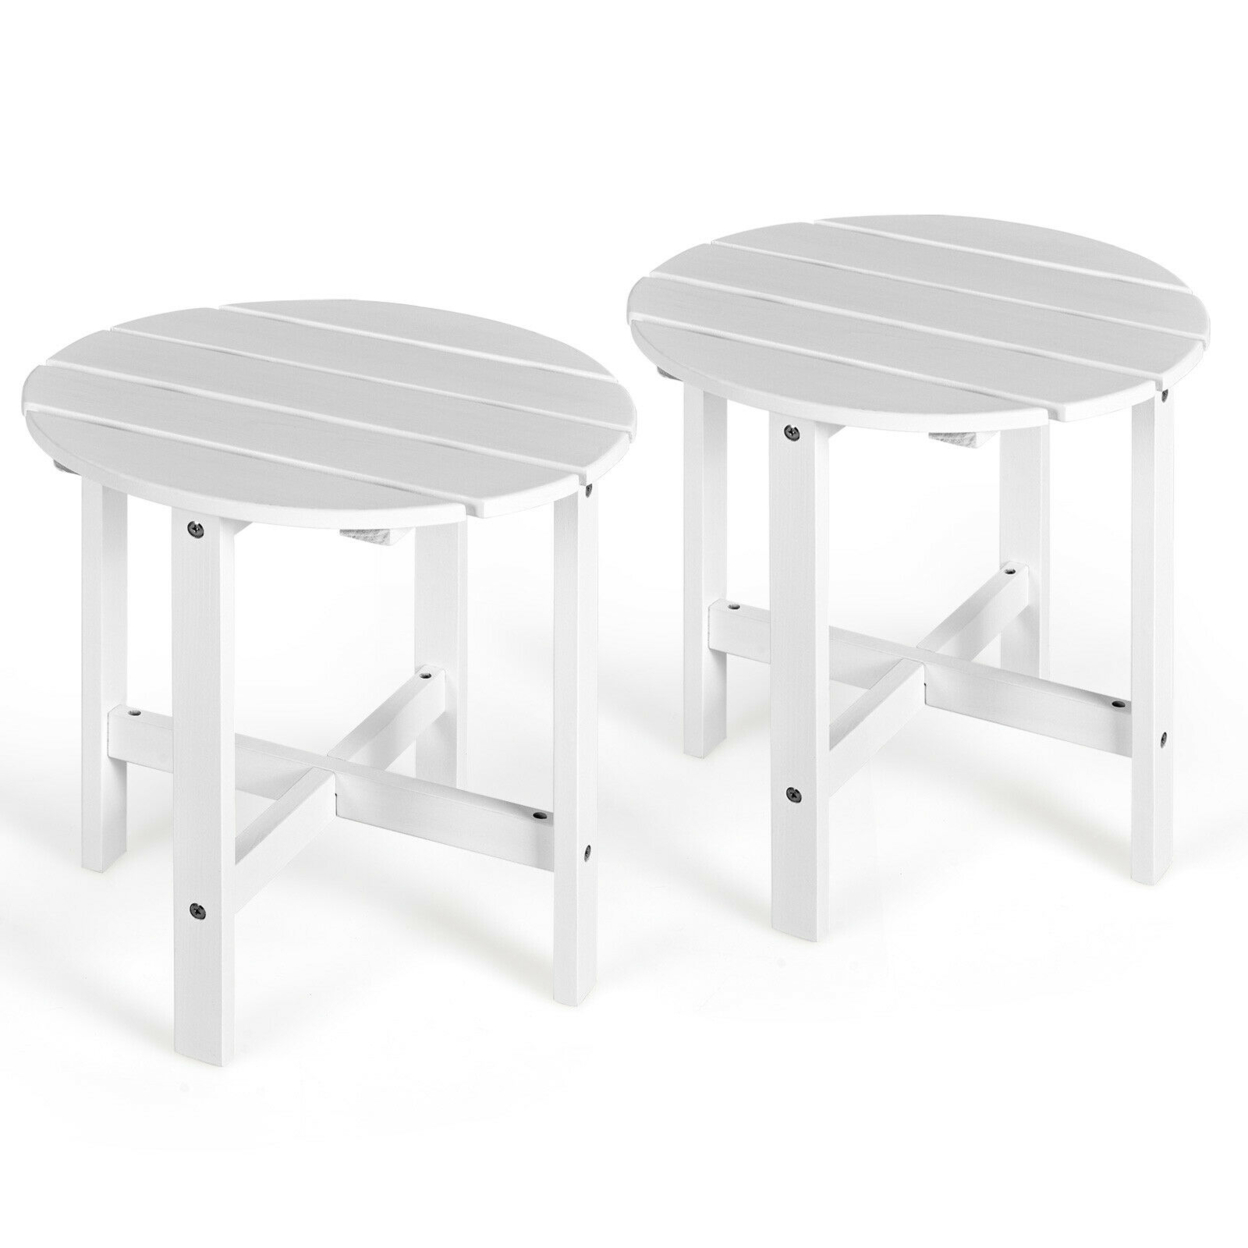 2 PCS 18'' Patio Round Side End Coffee Table Wooden Slat Deck - White